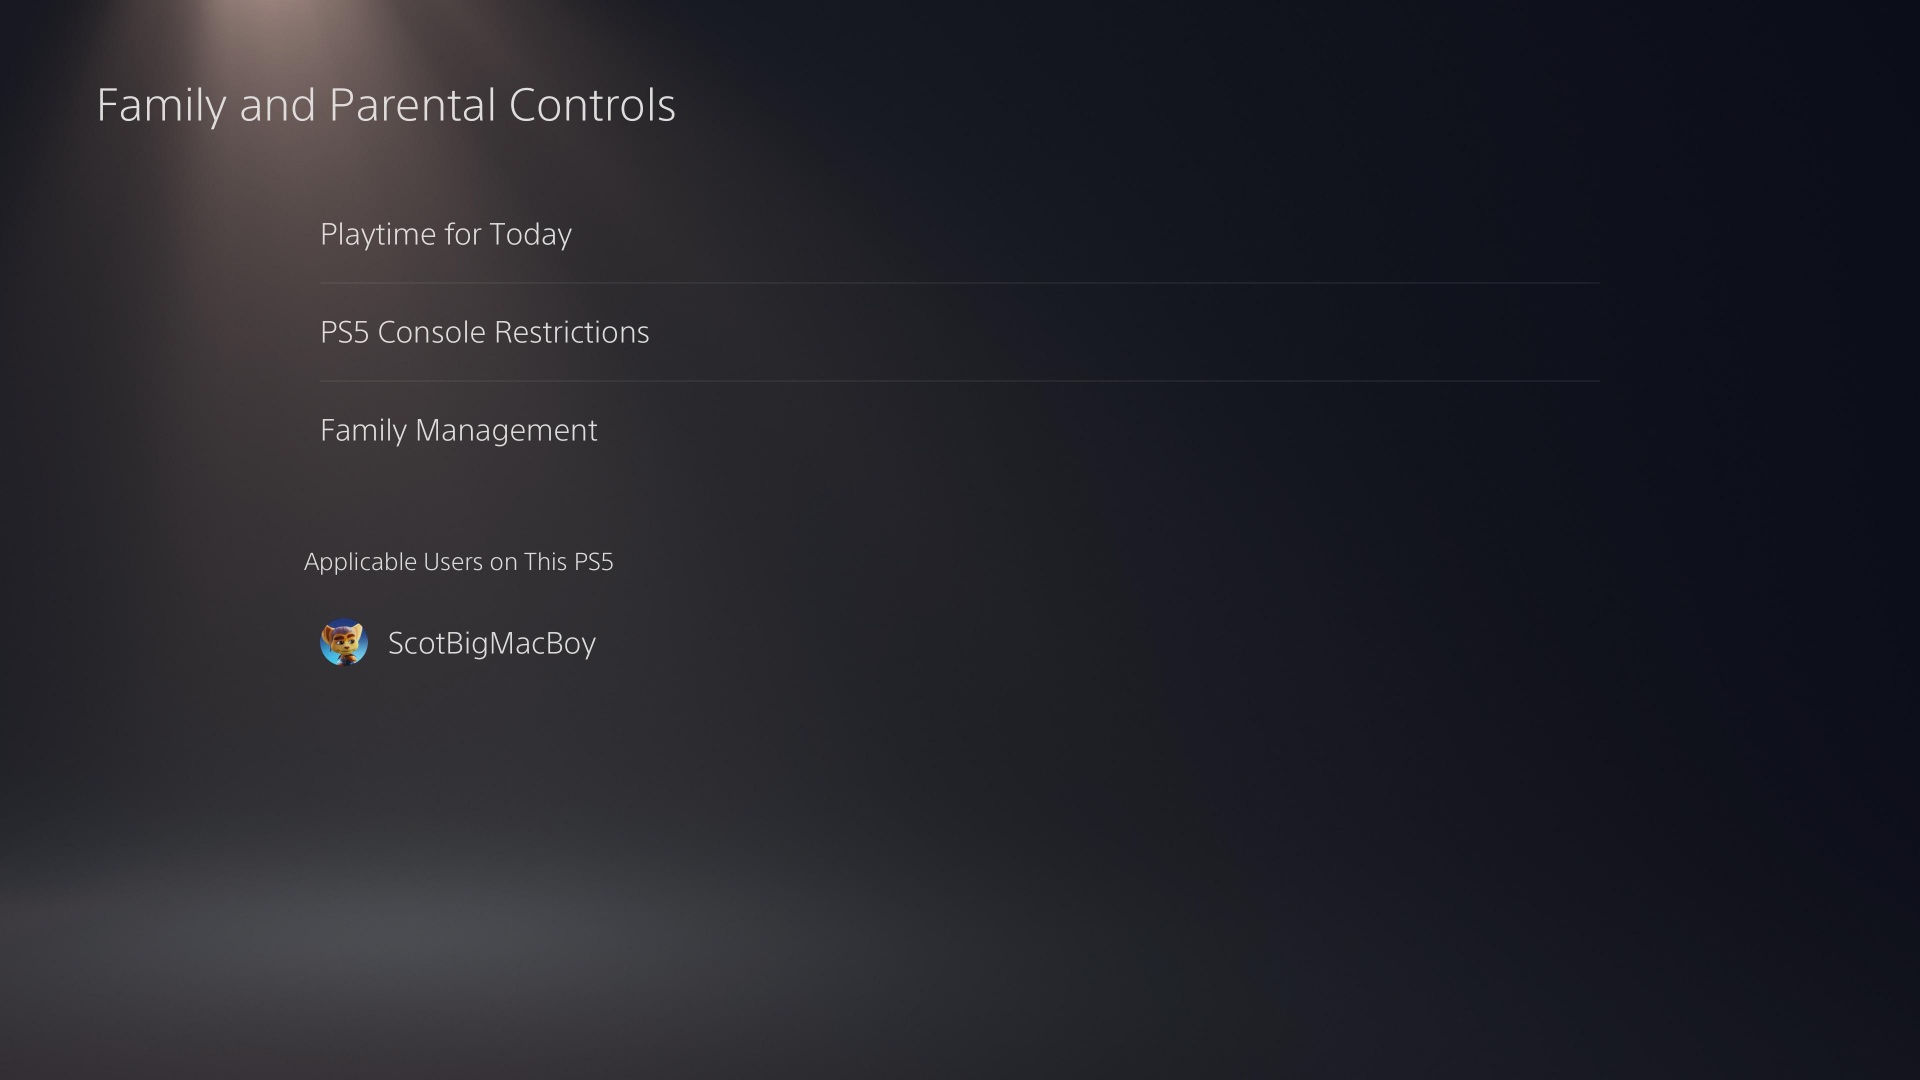 PS5 parental controls: The 'family and parental controls' options in the settings screen.